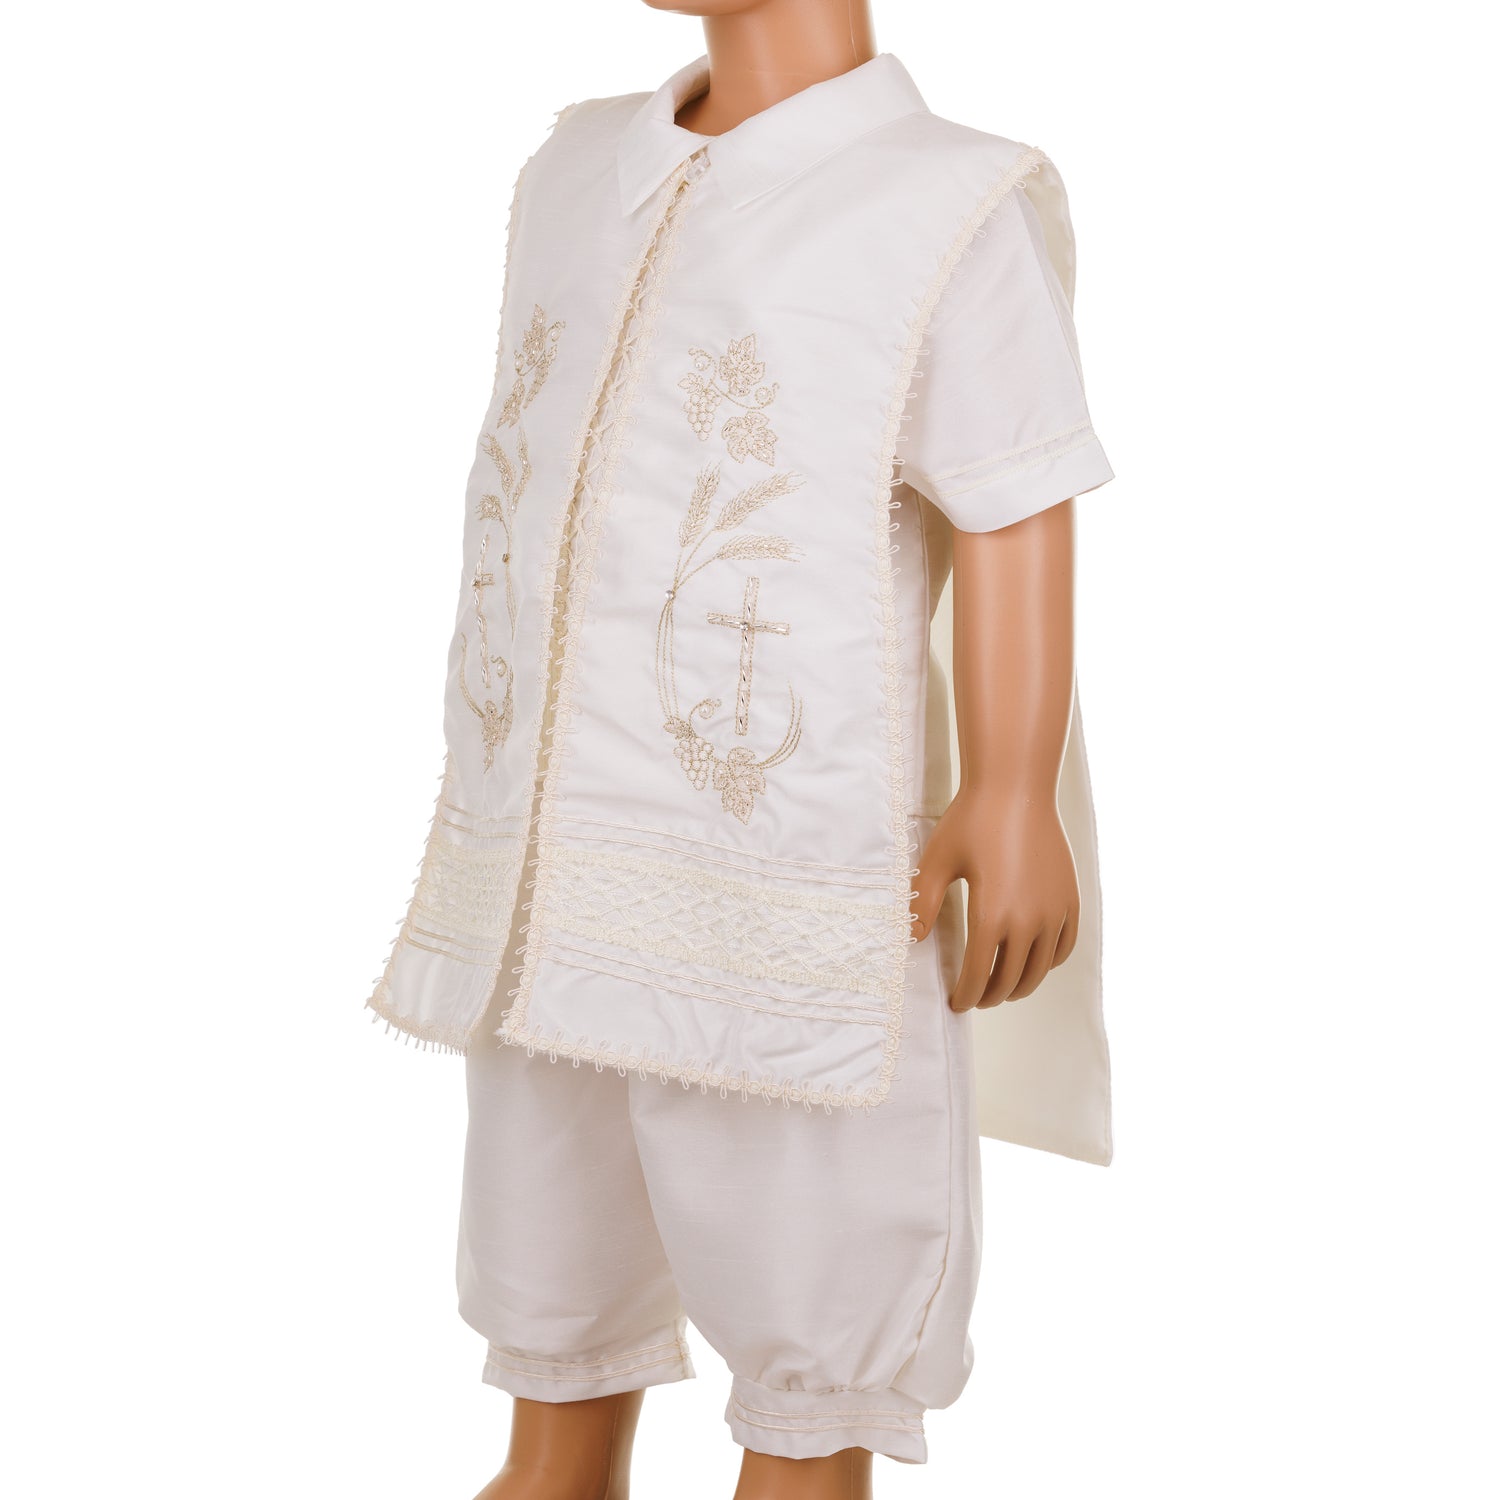 Baptism outfit, ivory, boy wearing baptism outfit